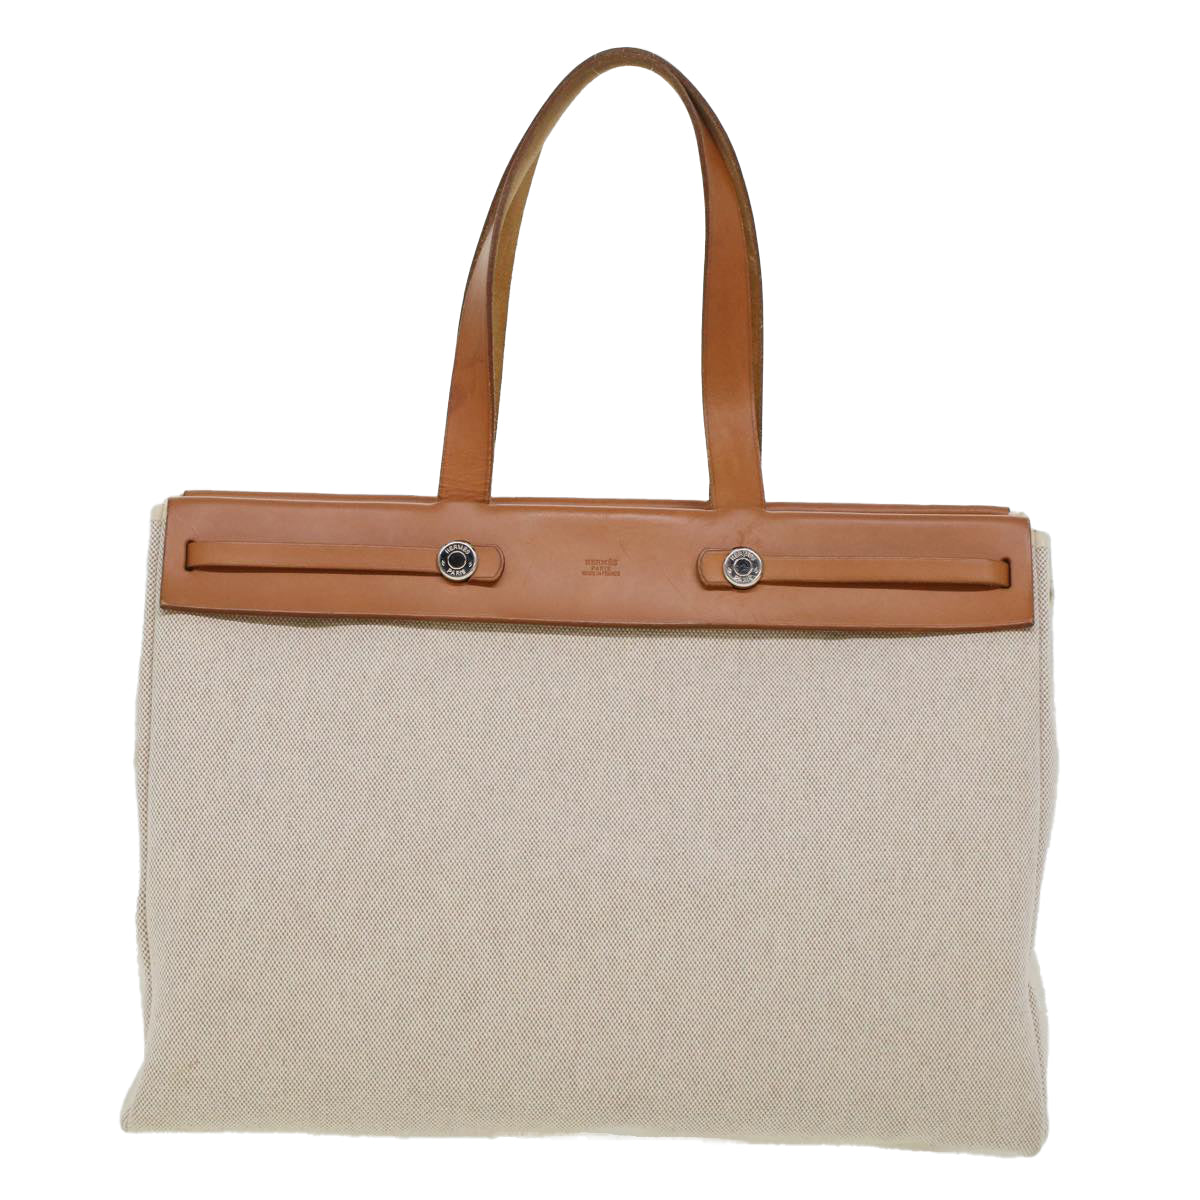 HERMES Her Bag Cabus GM Tote Bag Canvas Leather Beige Auth fm2384